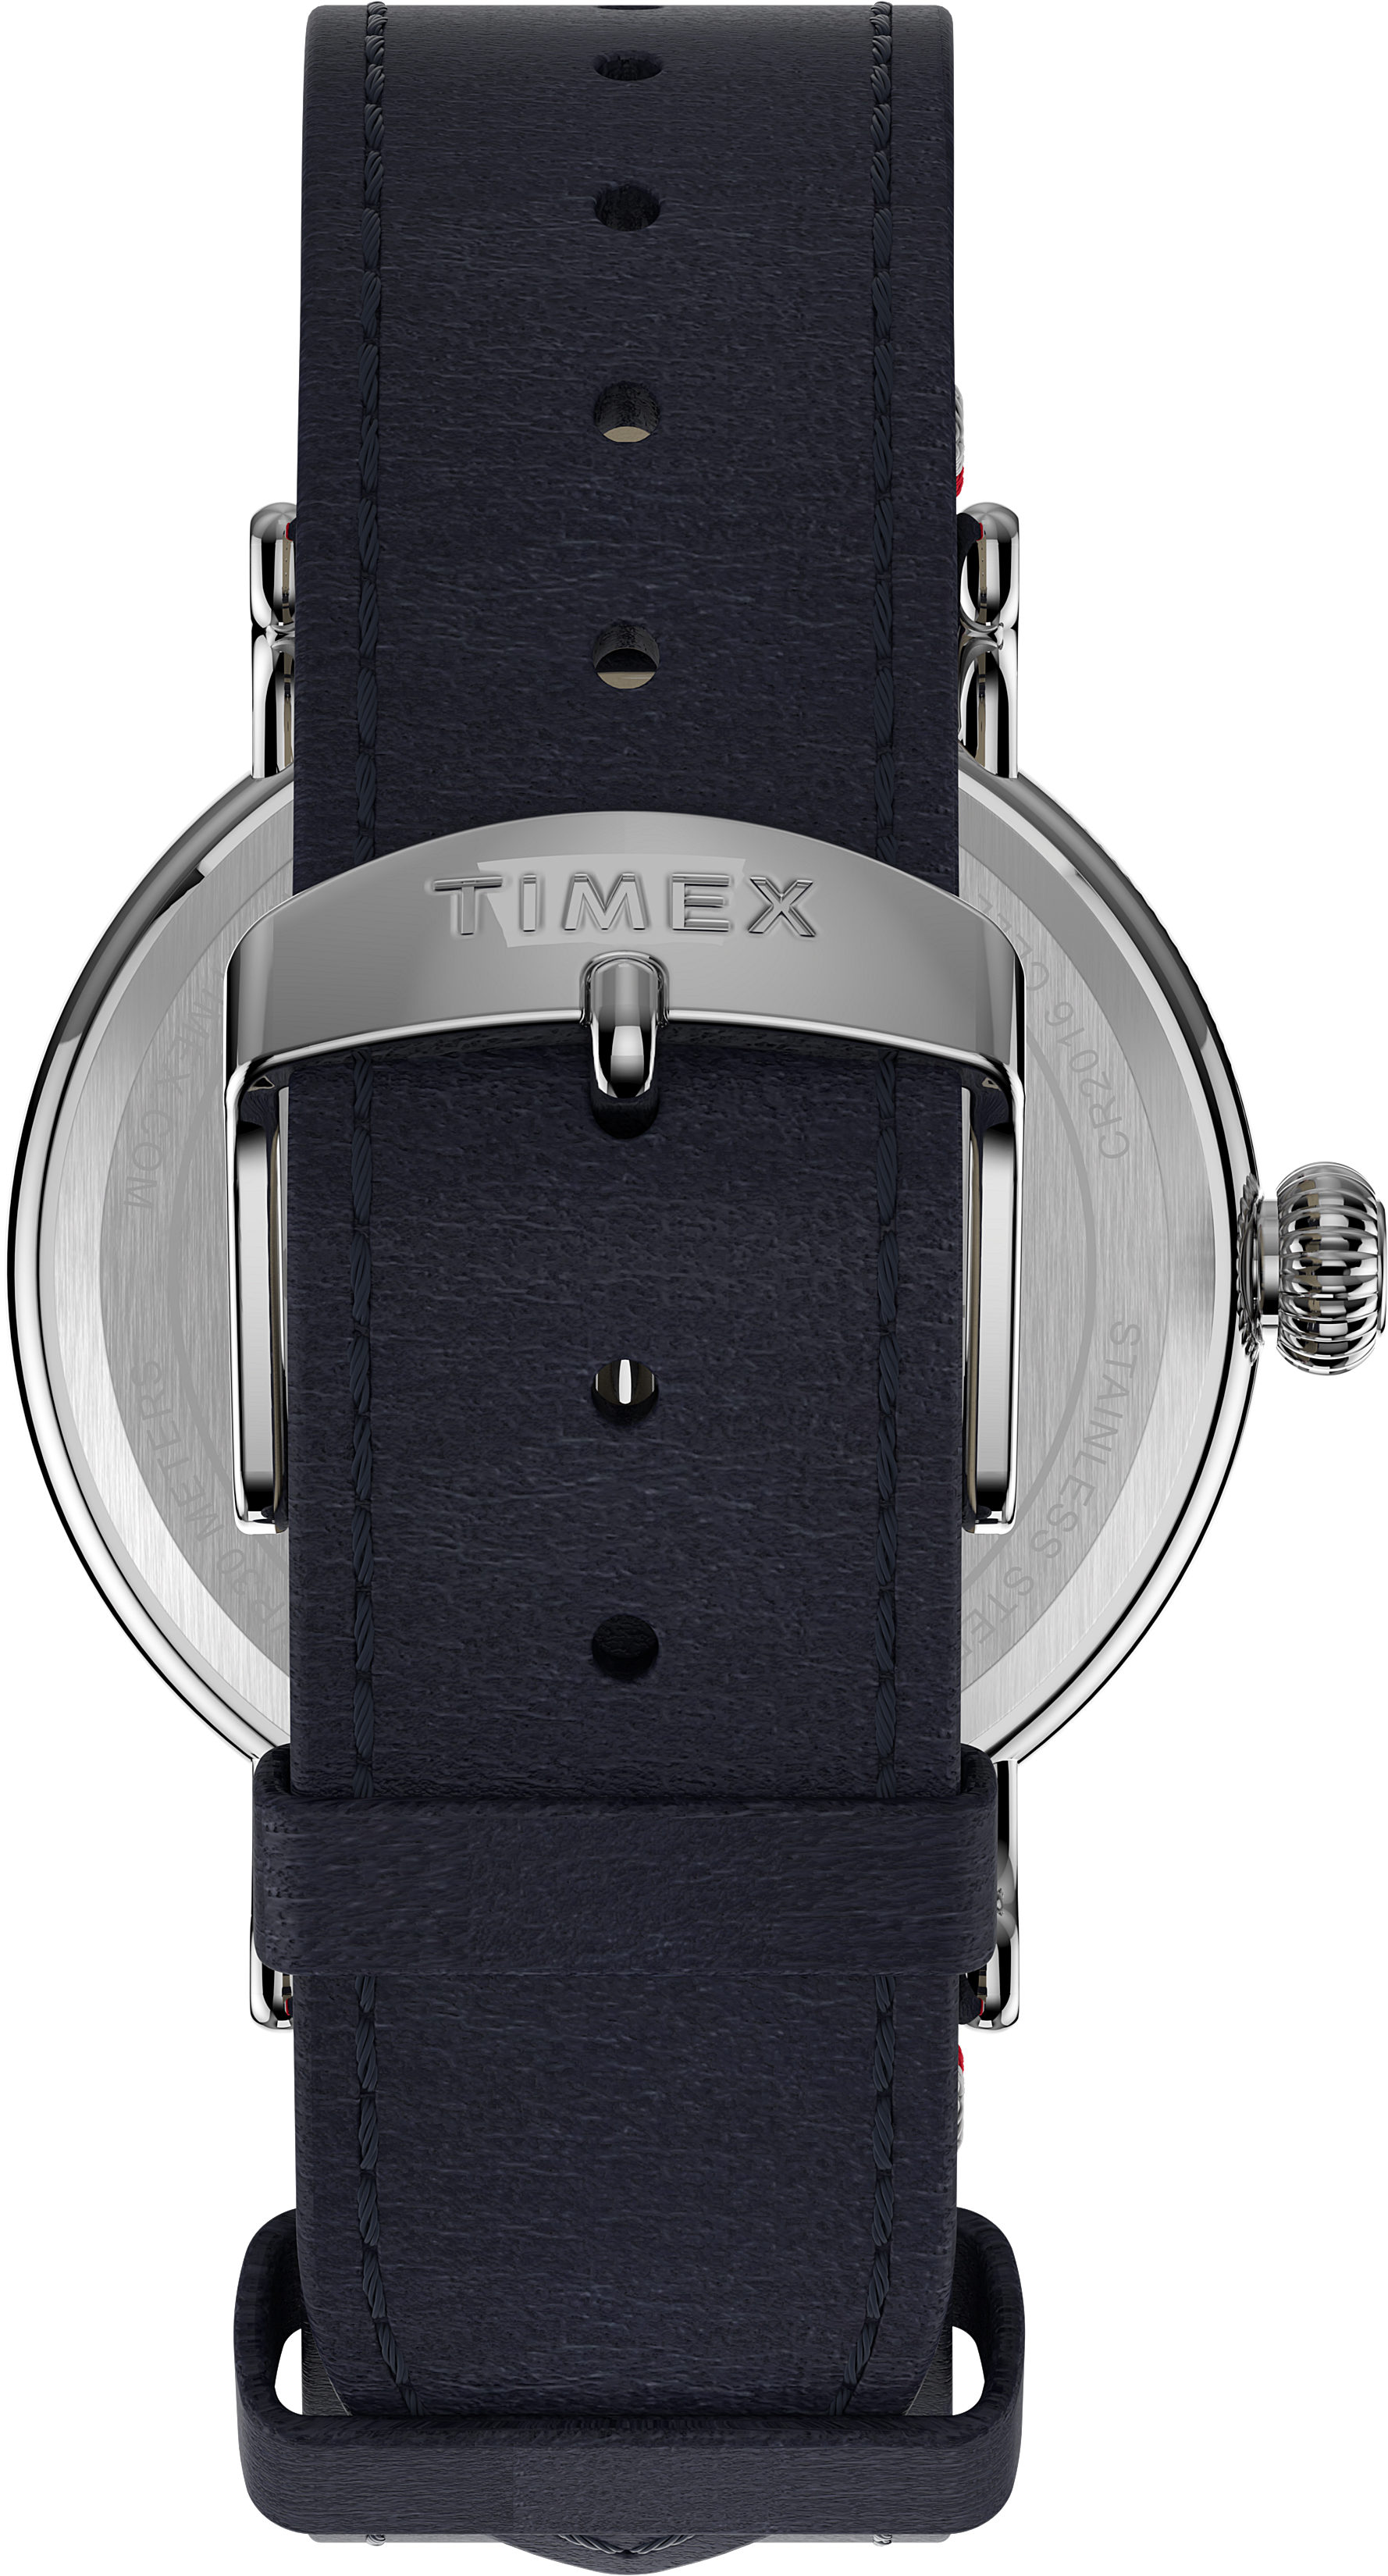 Timex Standard x Peanuts Featuring Snoopy USA 40mm Leather Strap Watch